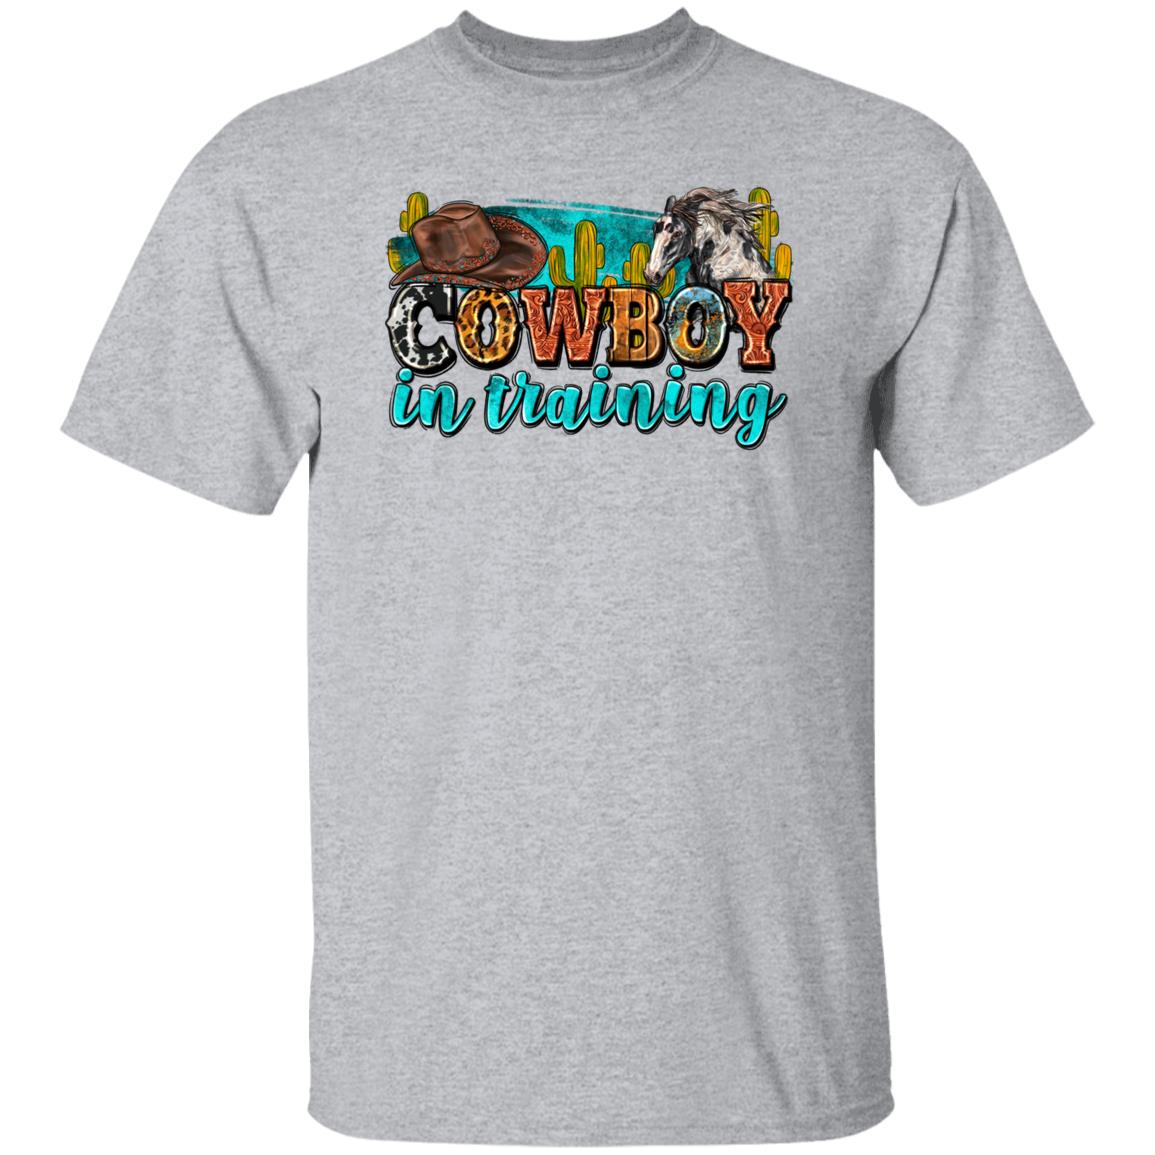 Cowboy in training T-Shirt Texas Western young cowboy Unisex tee White Sand Sport Grey-Sport Grey-Family-Gift-Planet